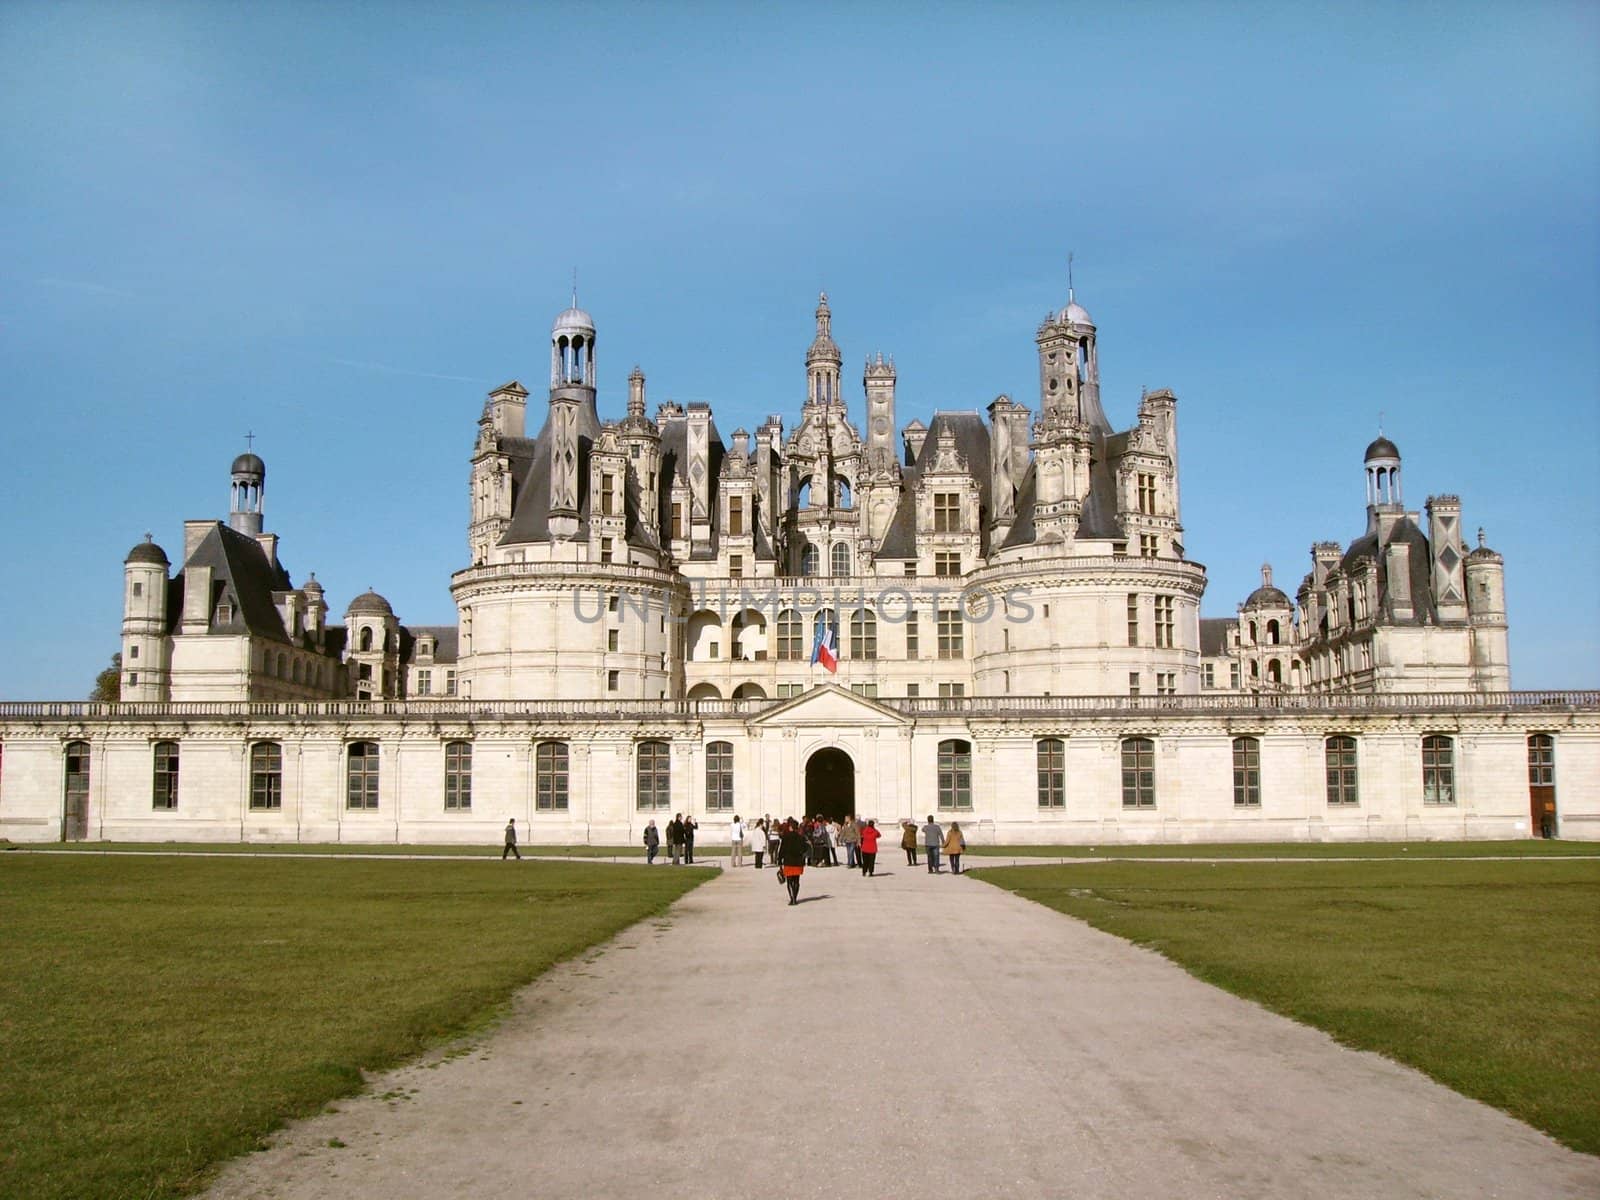 Chambord castle in Loire France by Palych